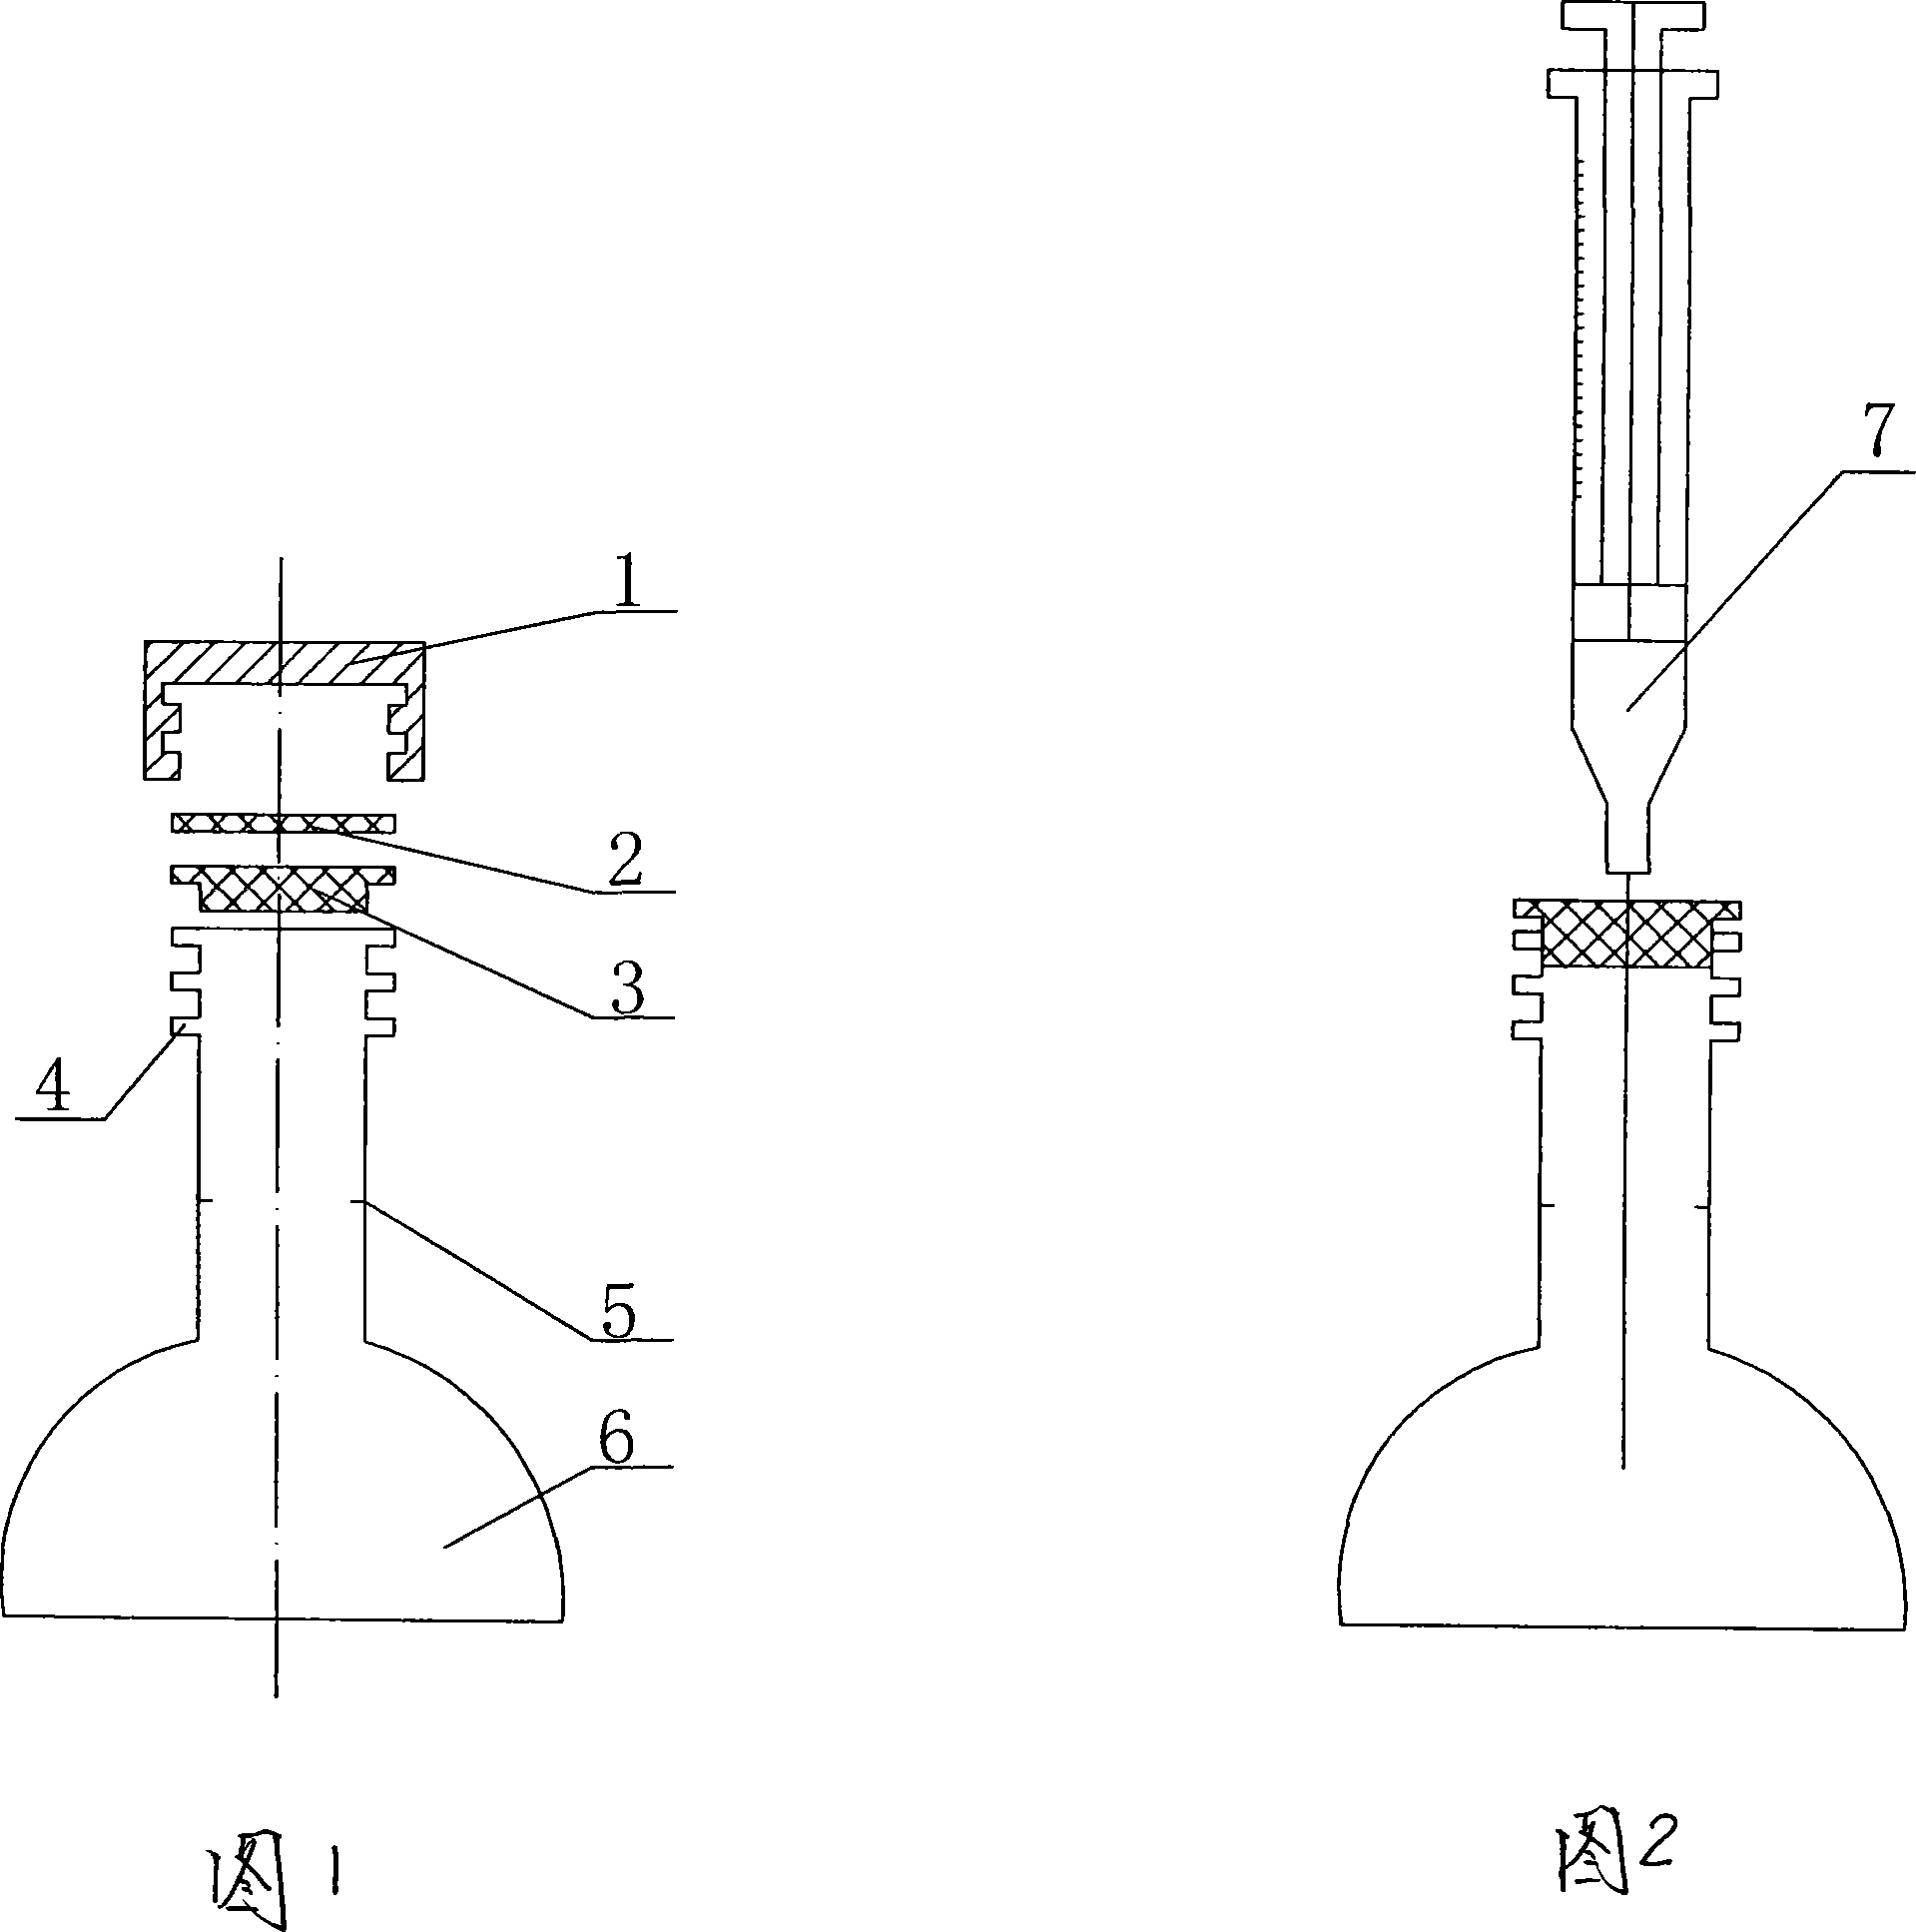 Dedicated measuring flask in use for preparing and storing volatile titer, and method of use